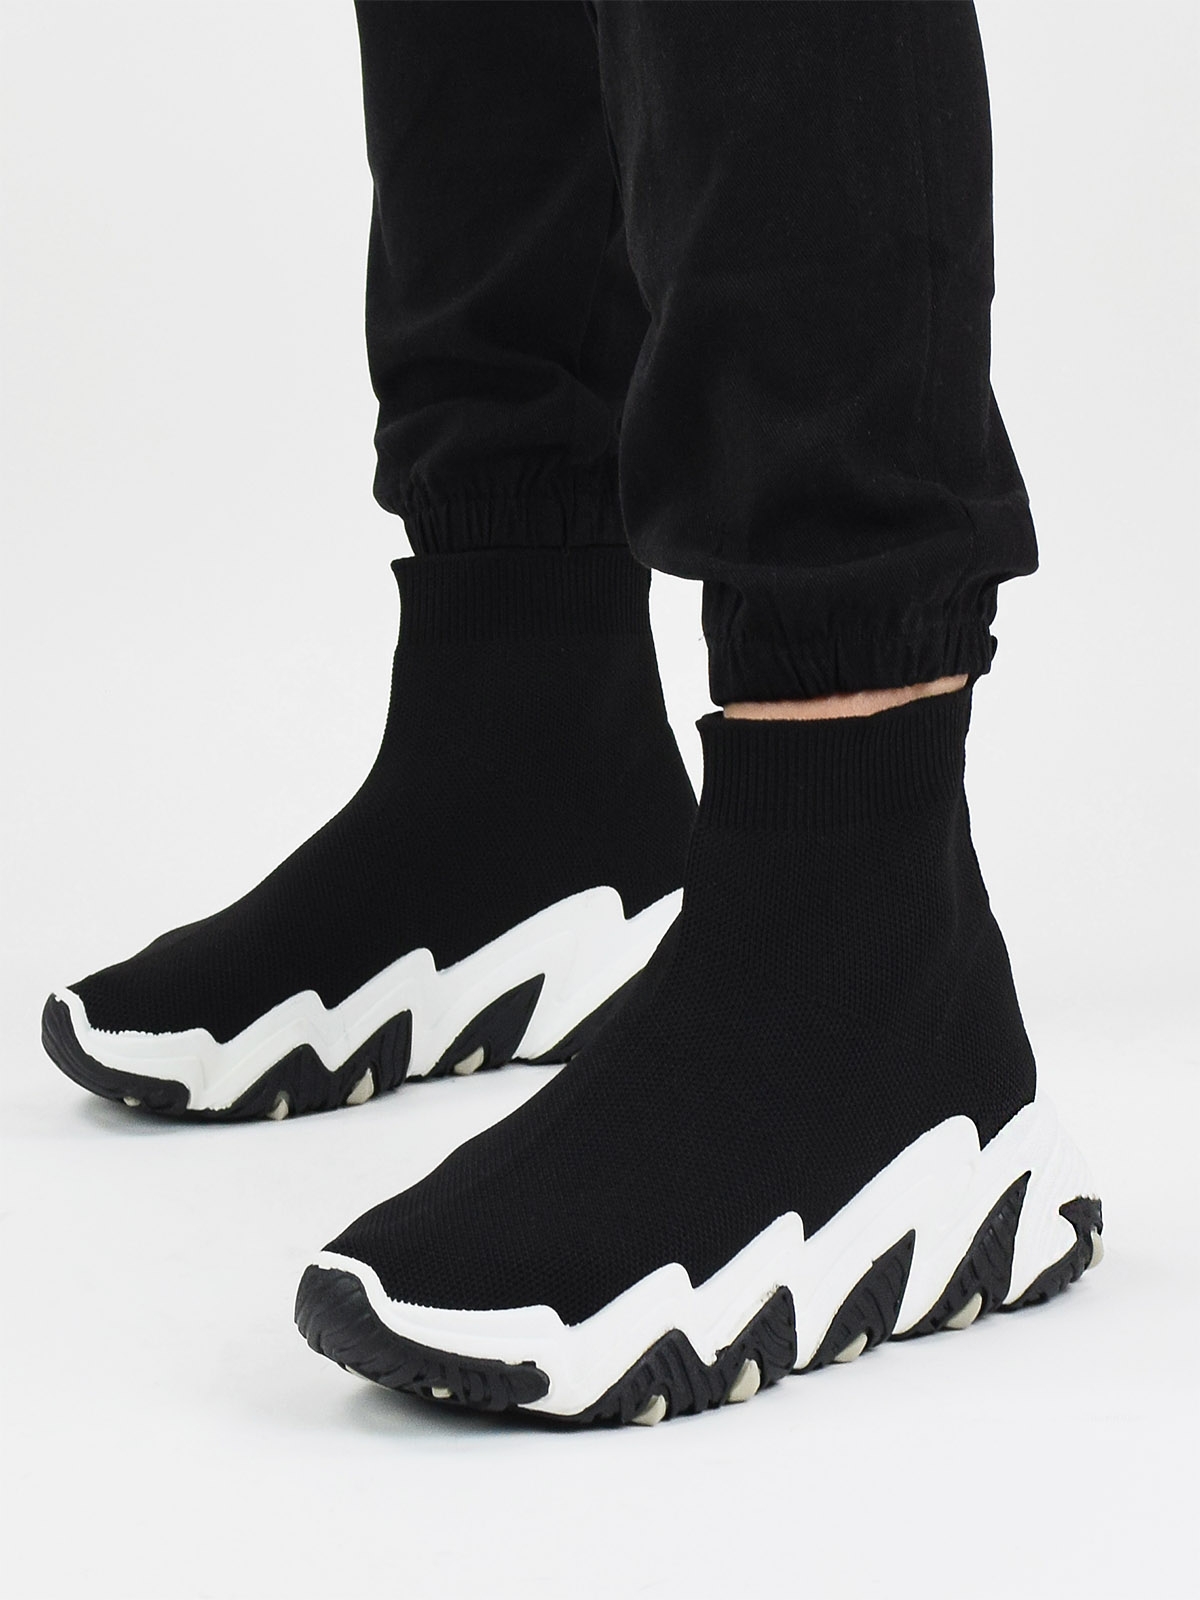 Sock trainers in black & white